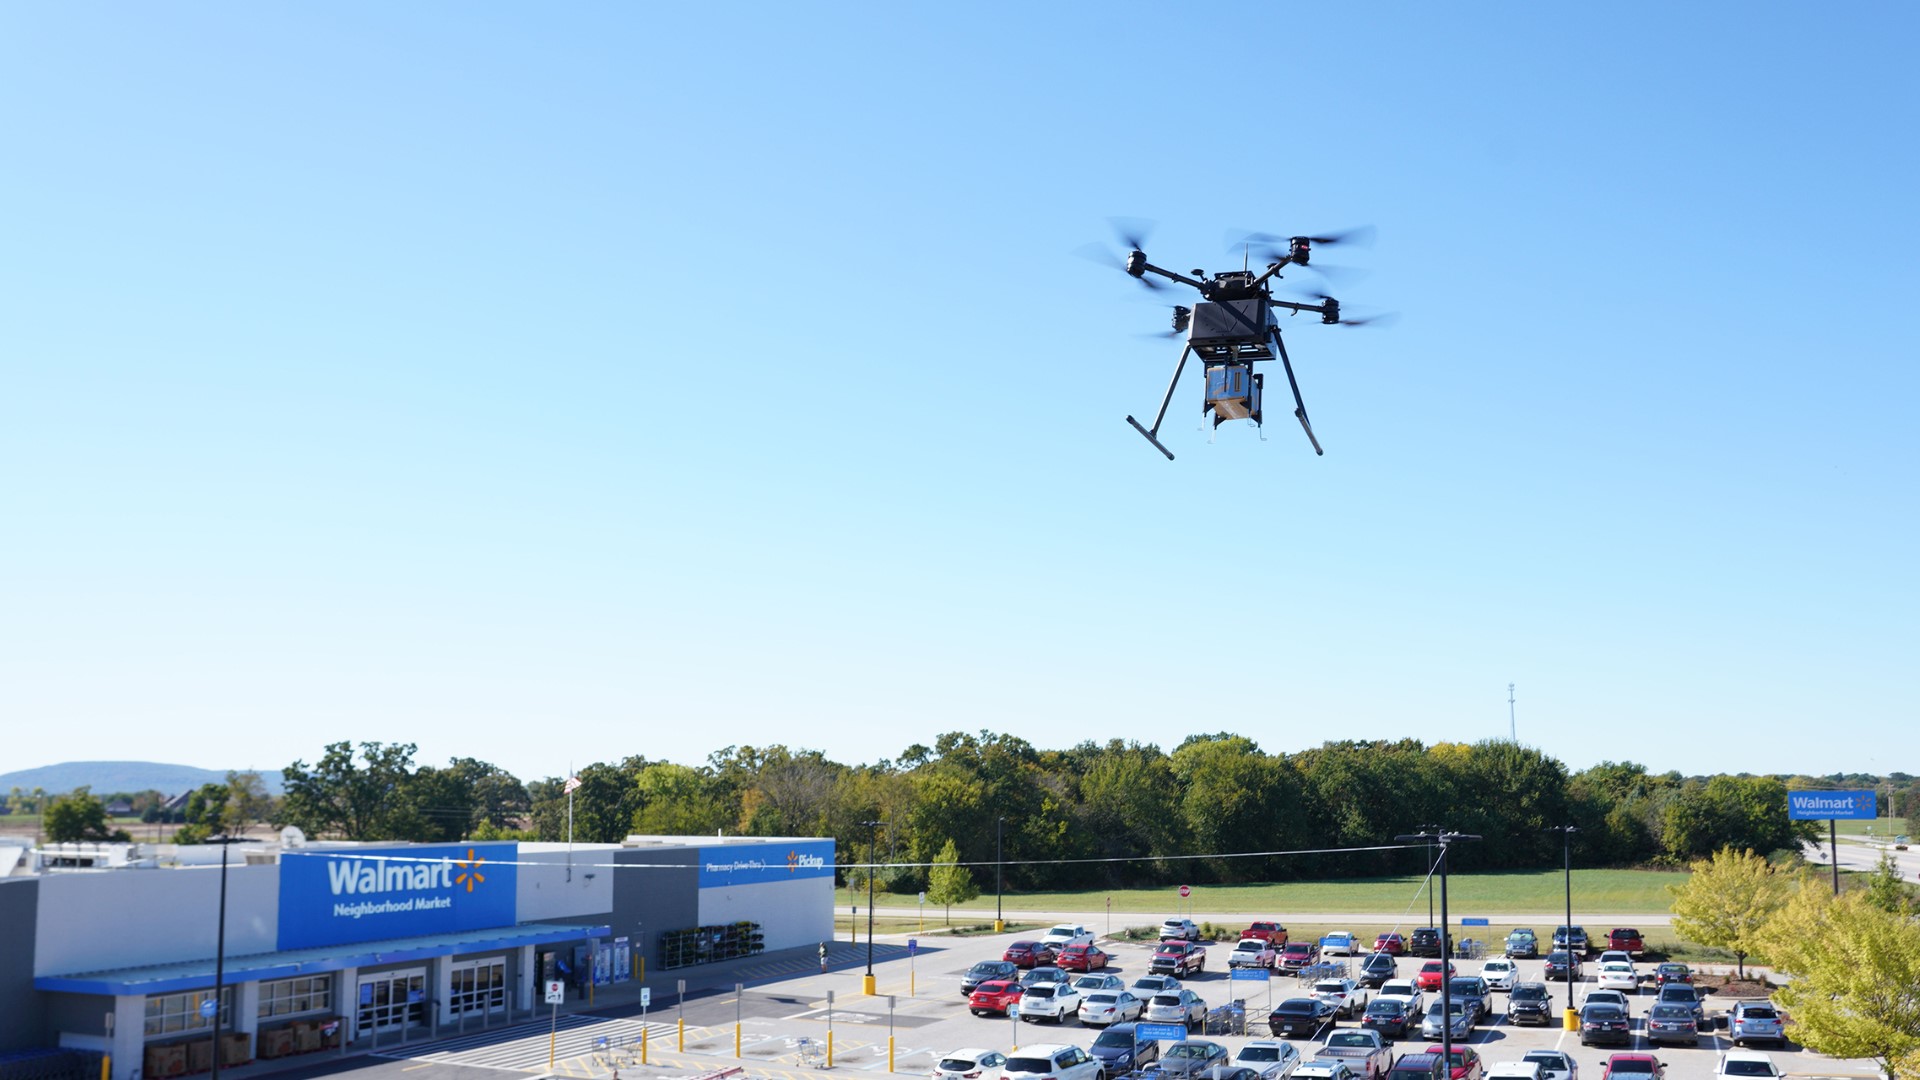 Retail giant Walmart is launching a drone delivery service at 4 stores in the Valley.